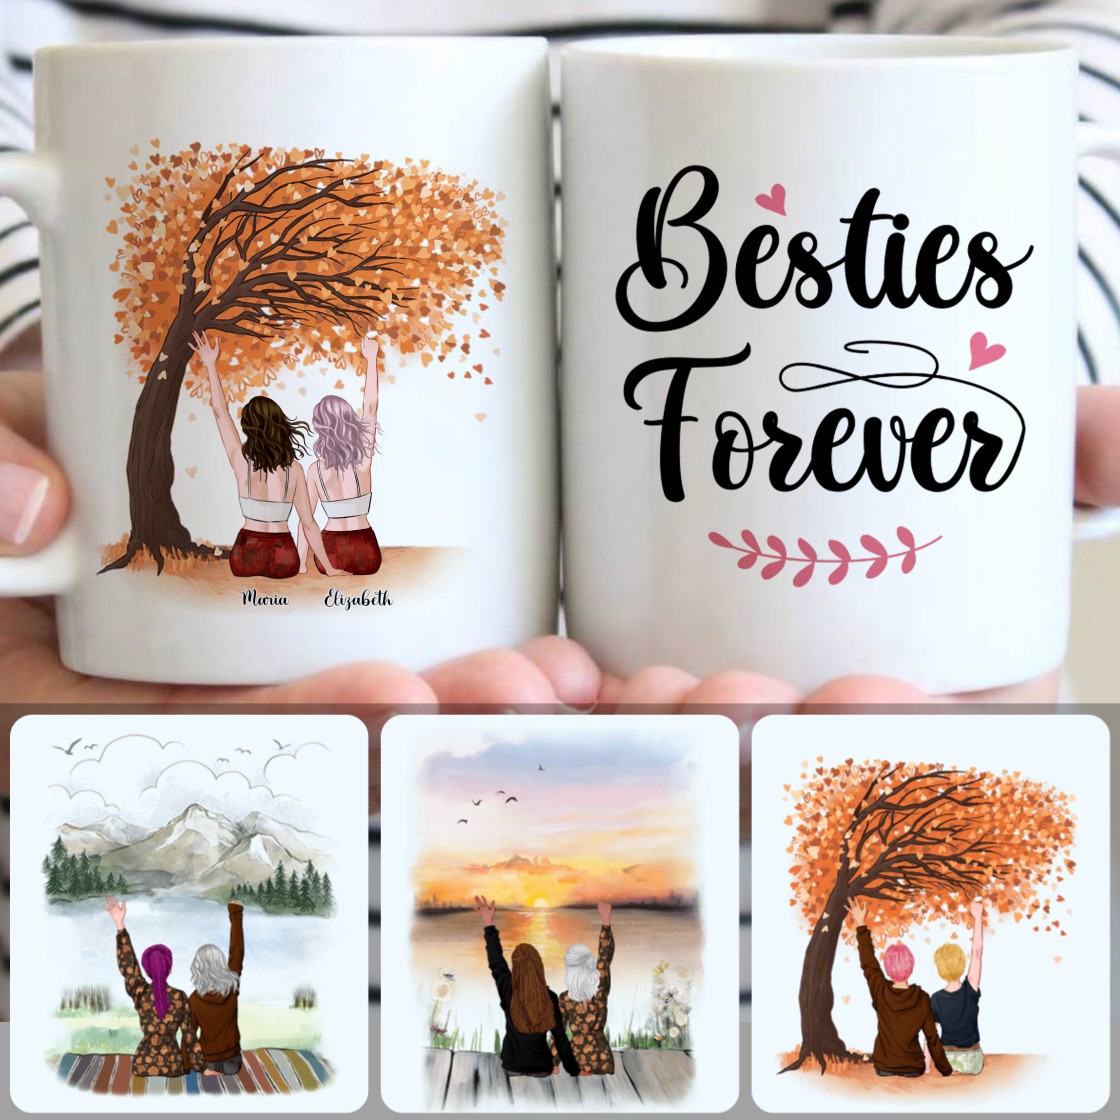 Personalized Mug, Unique Birthday Gifts, 2 Best Friends Forever Customized Coffee Mug With Names